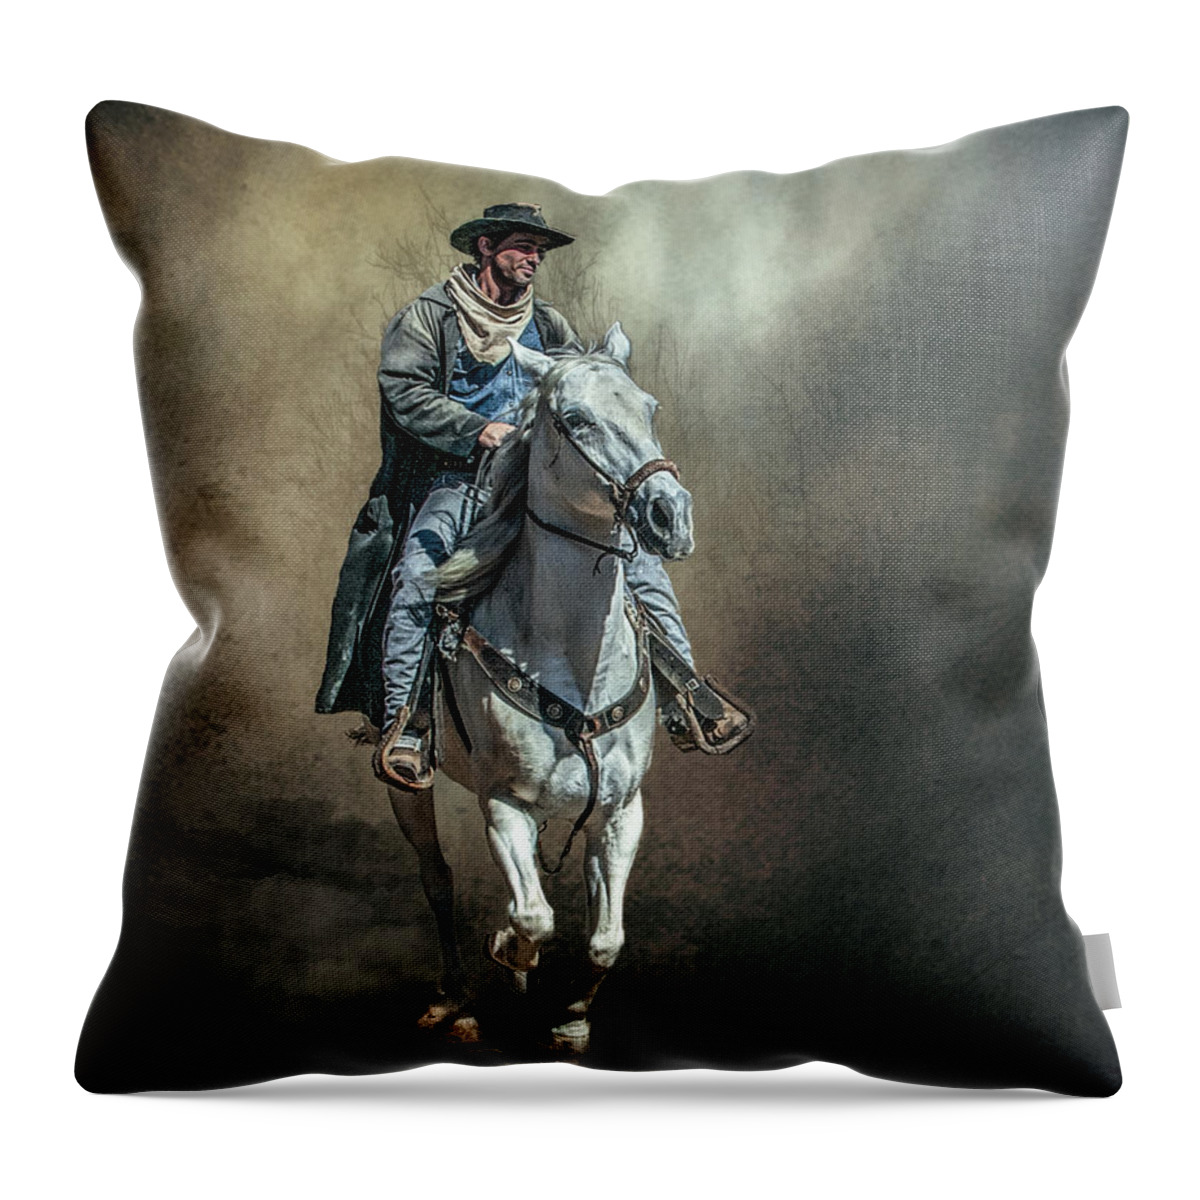 Cowboy Throw Pillow featuring the photograph The Lone Drifter by Brian Tarr